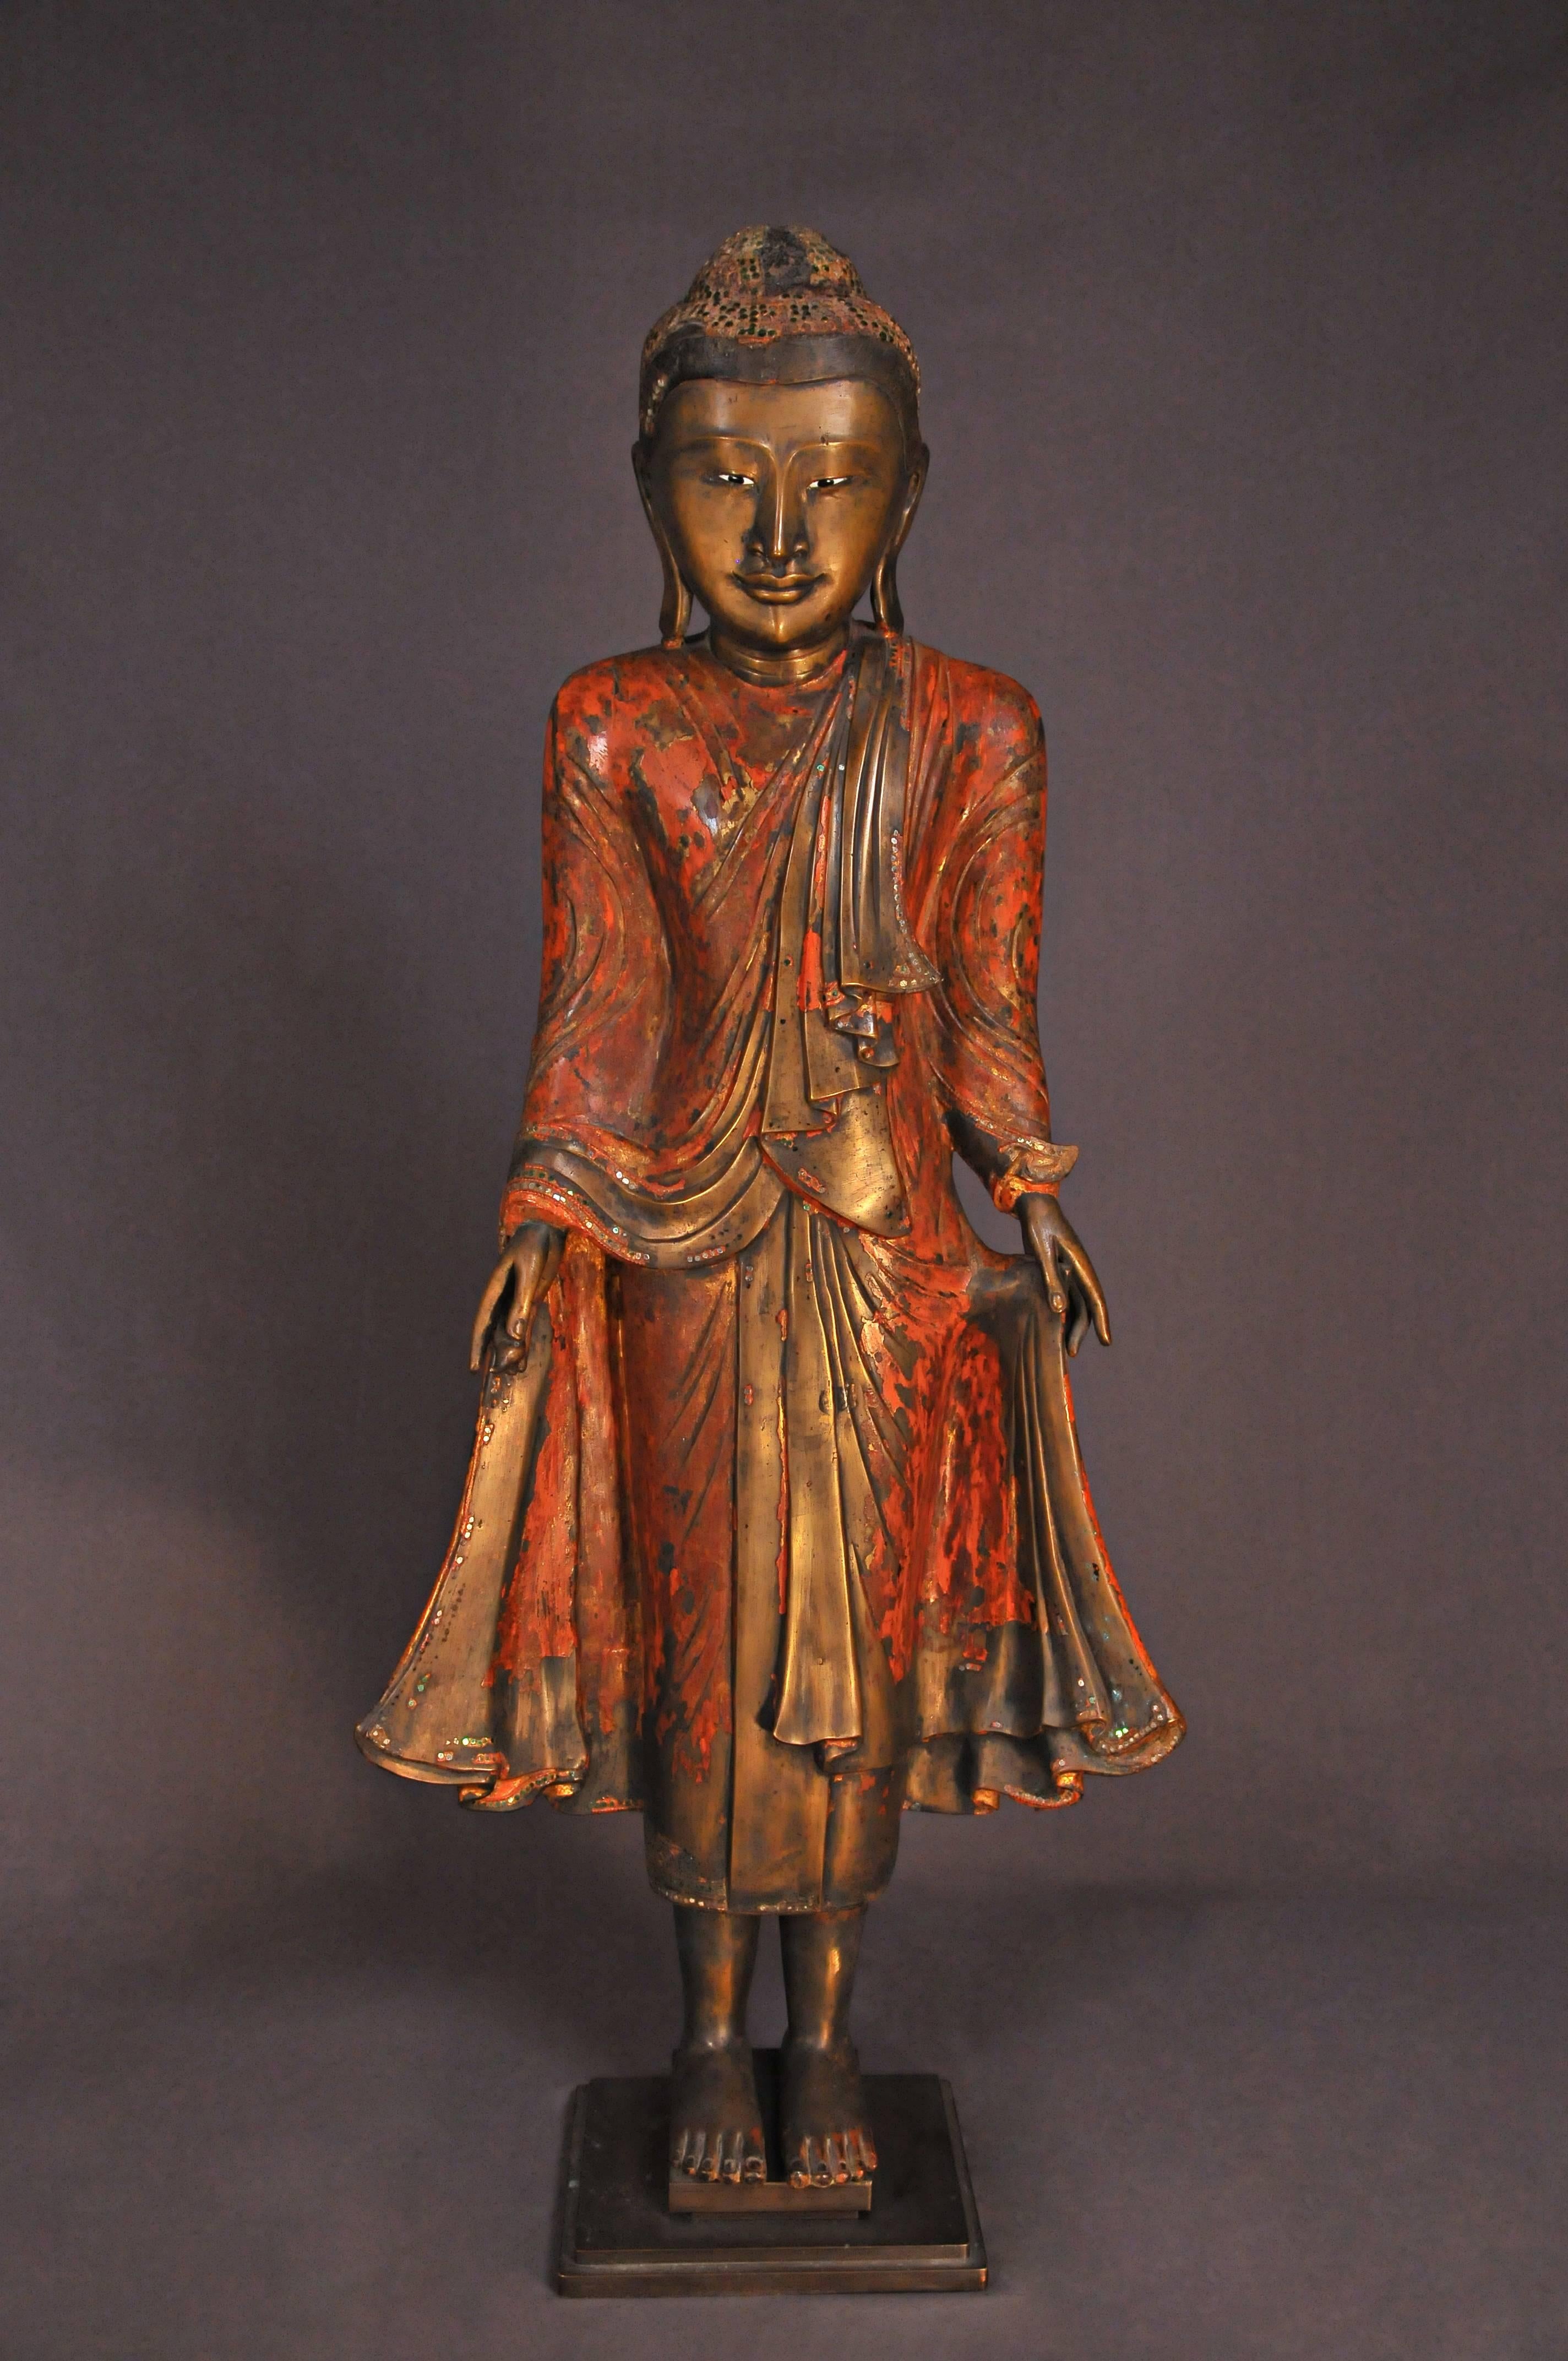 The sculptors of Burma have created a sacred, profane art of incomparable beauty and wealth.

Subjected to strict canons, the statuary of religious inspiration is nonetheless imprinted with a deep sense of spirituality and grandeur.

Standing